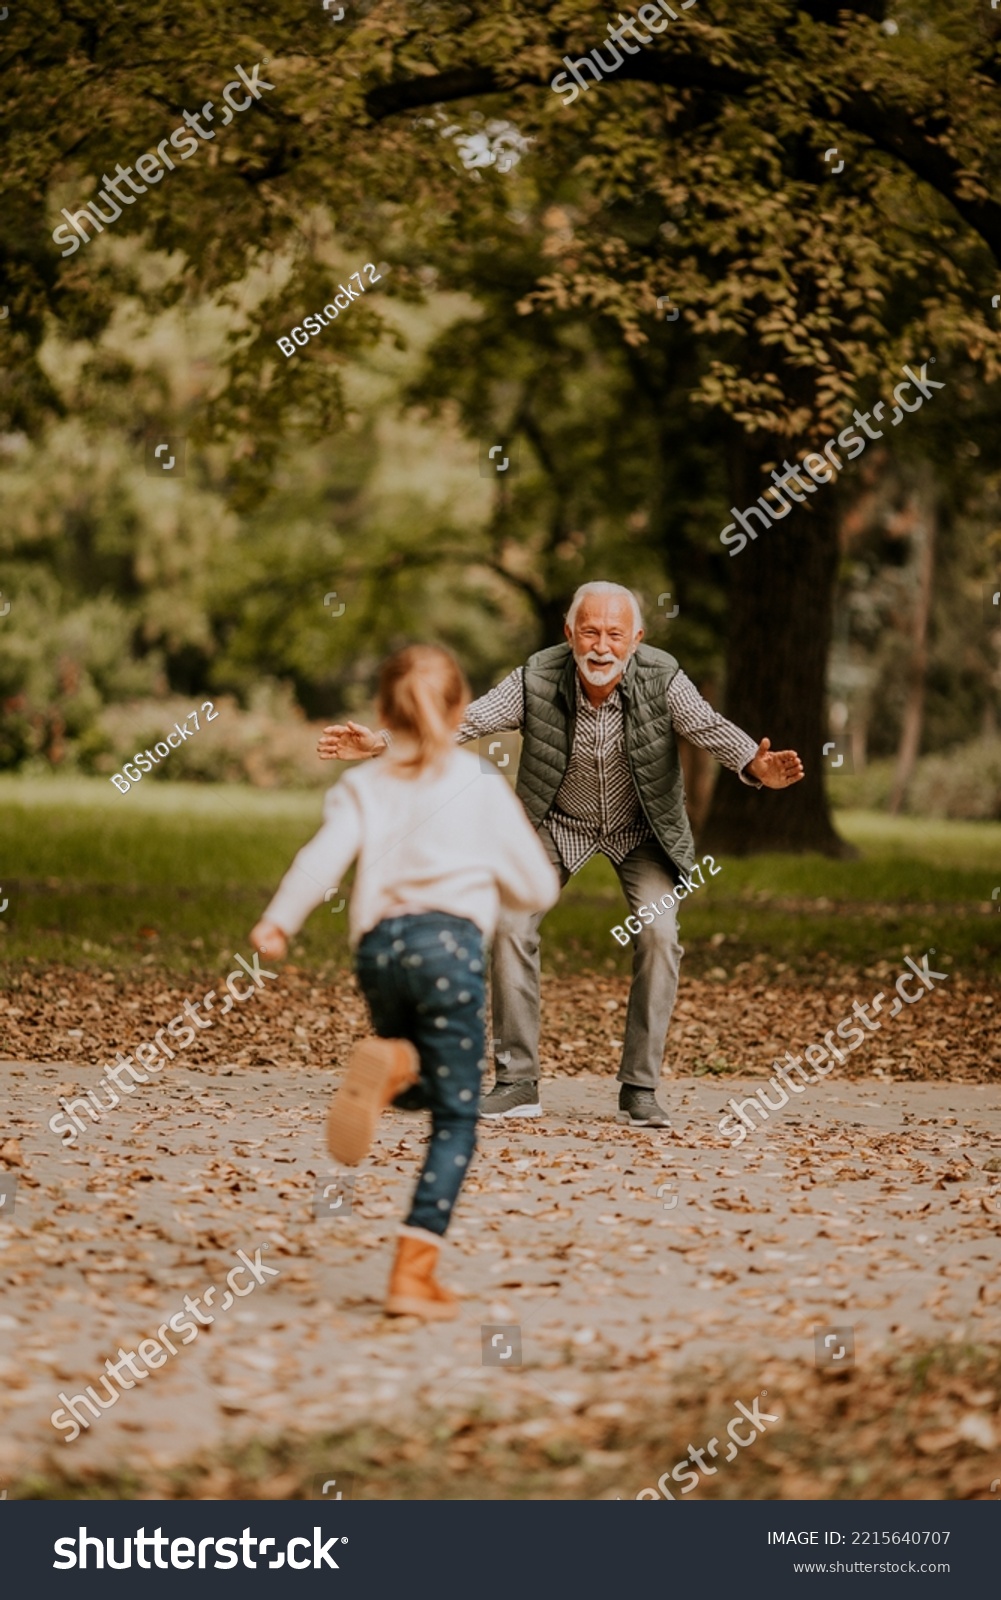 Handsome grandfather spending time with his granddaughter in park on autumn day #2215640707